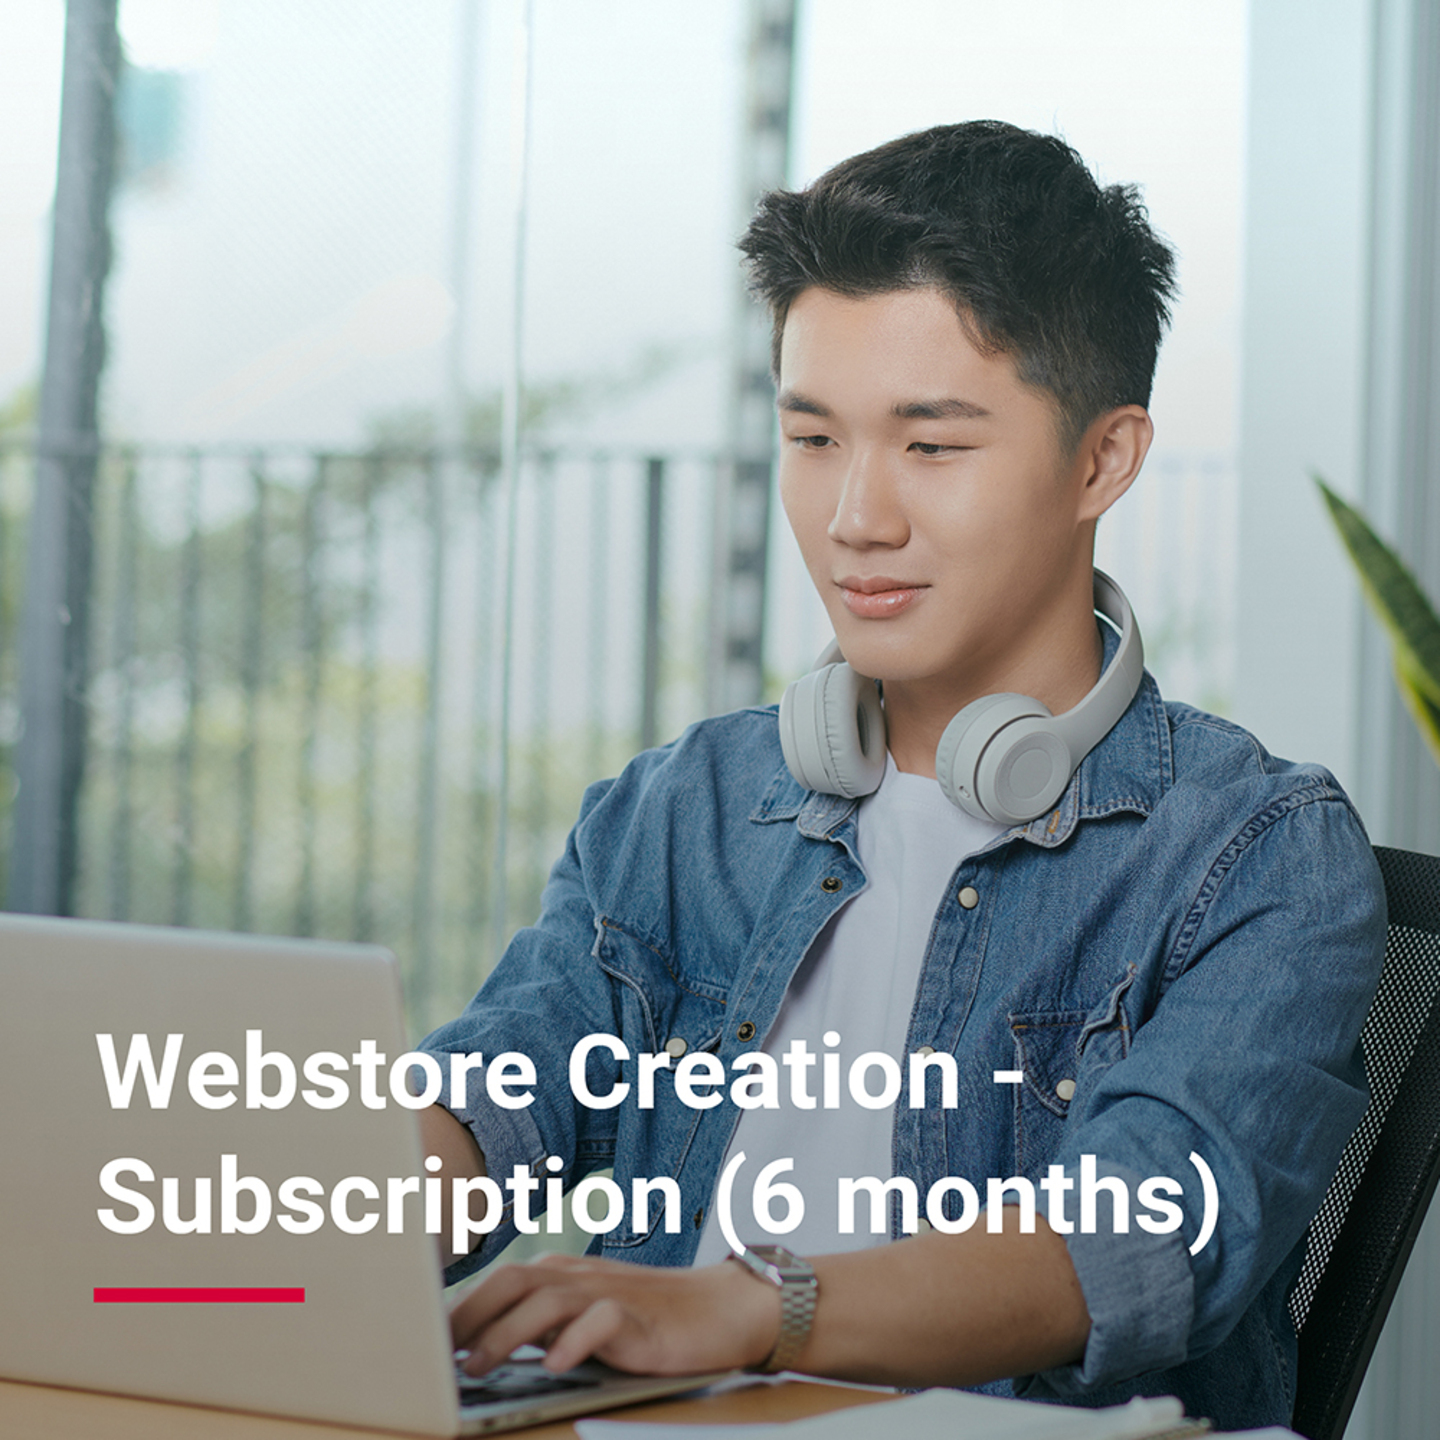 Webstore Creation - Subscription  6 months